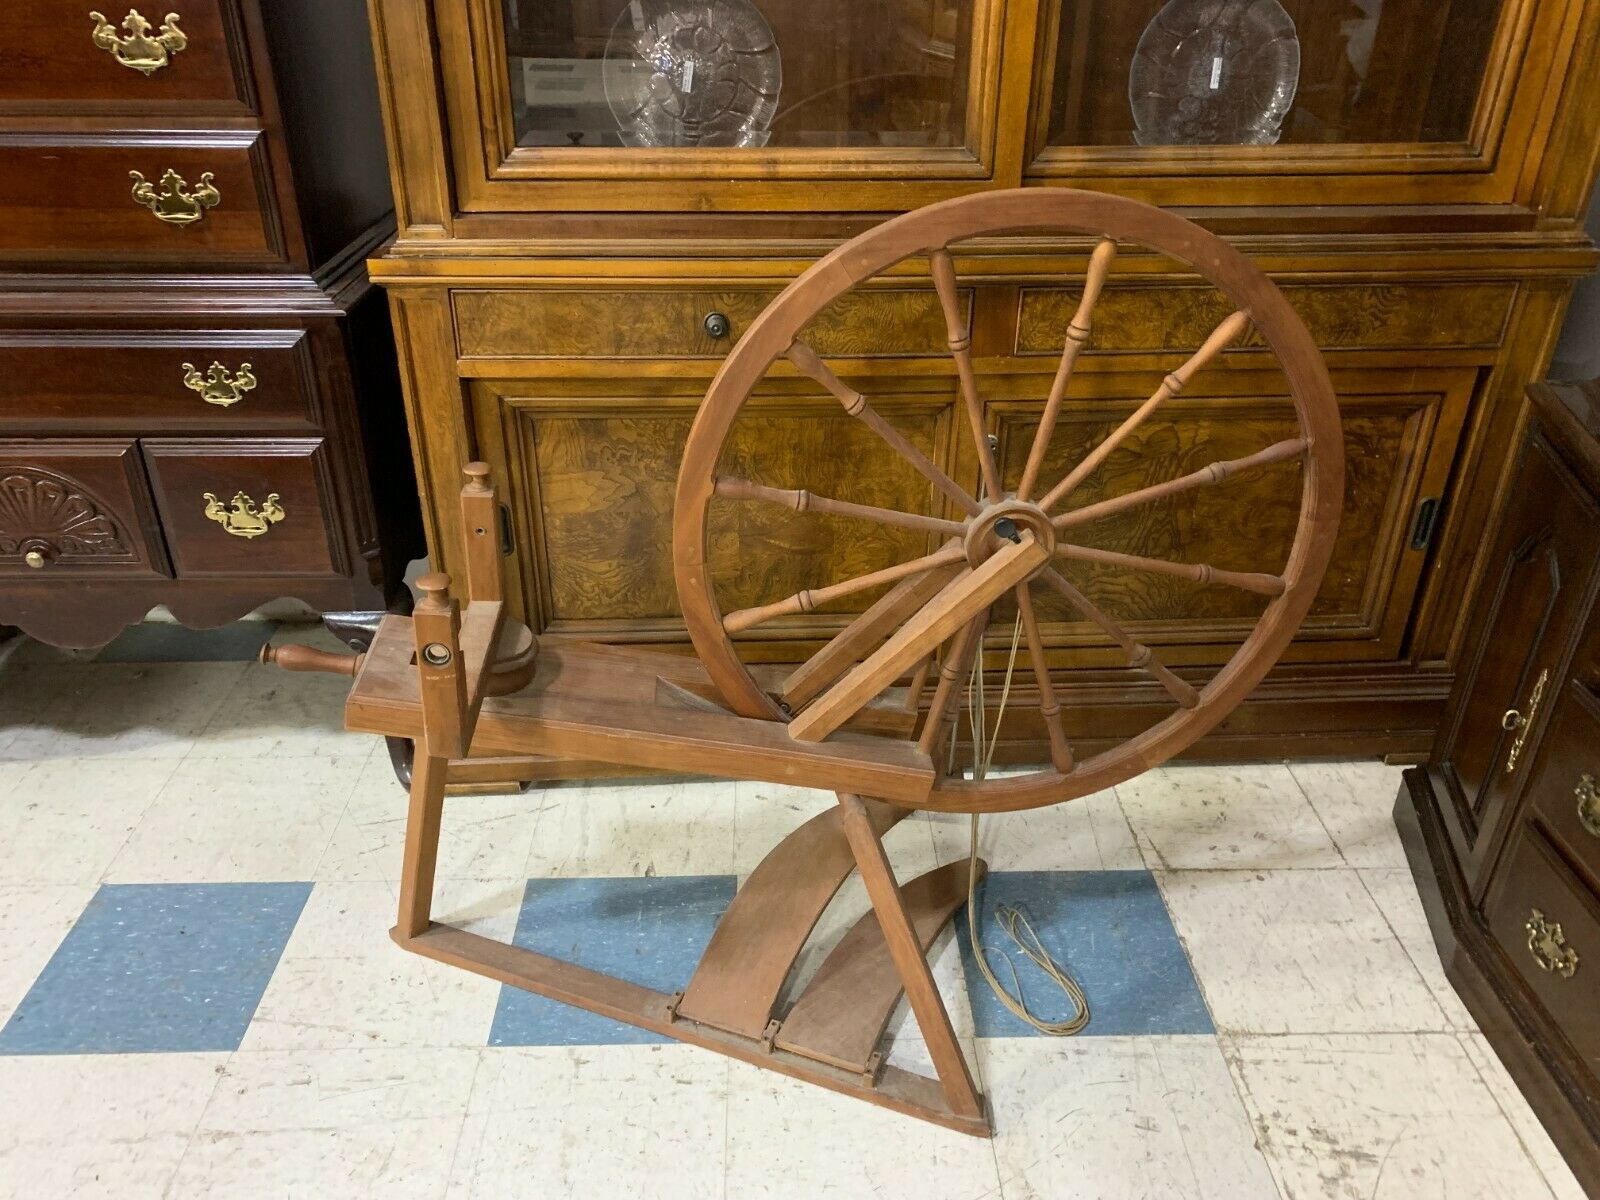 Antique Paul Dixon Spinning Wheel W/ All Pieces Used To Operate It Included